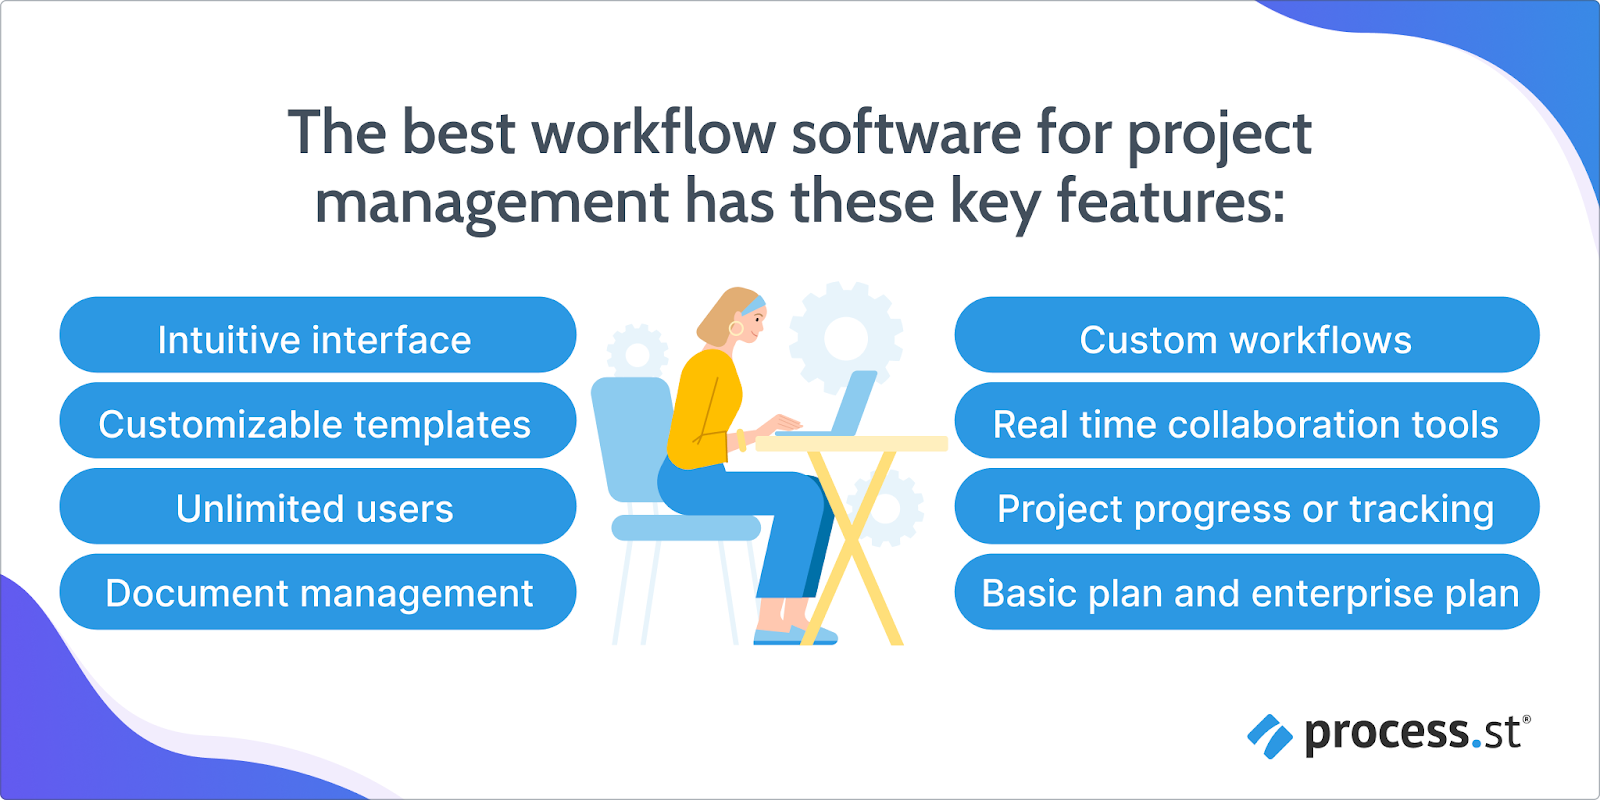 Image showing the key features of workflow software for project management